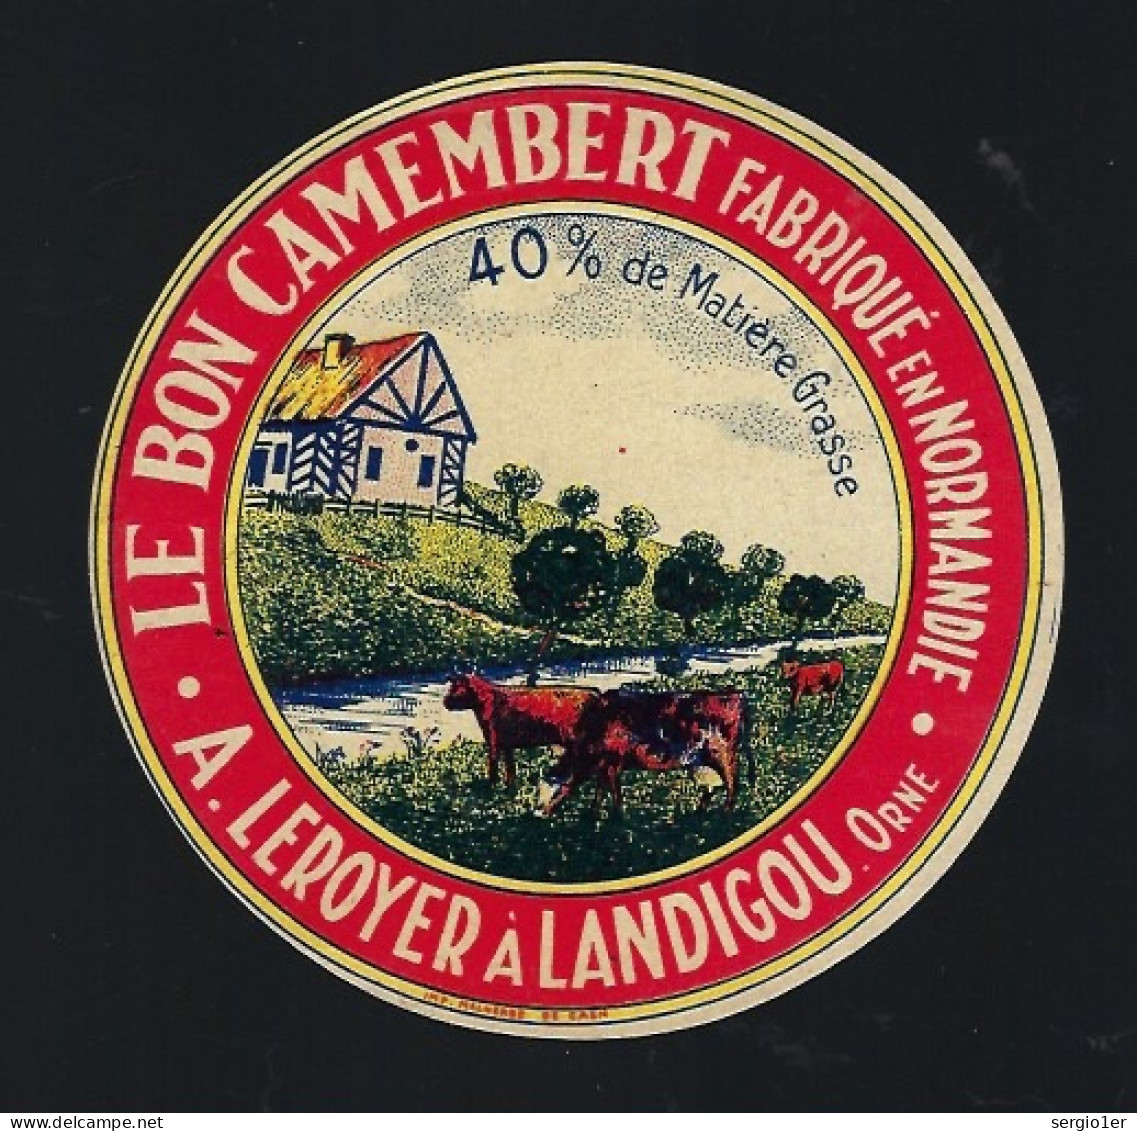 Etiquette Fromage Camembert Normandie 40%mg A Leroyer Langidou Orne 61 - Cheese